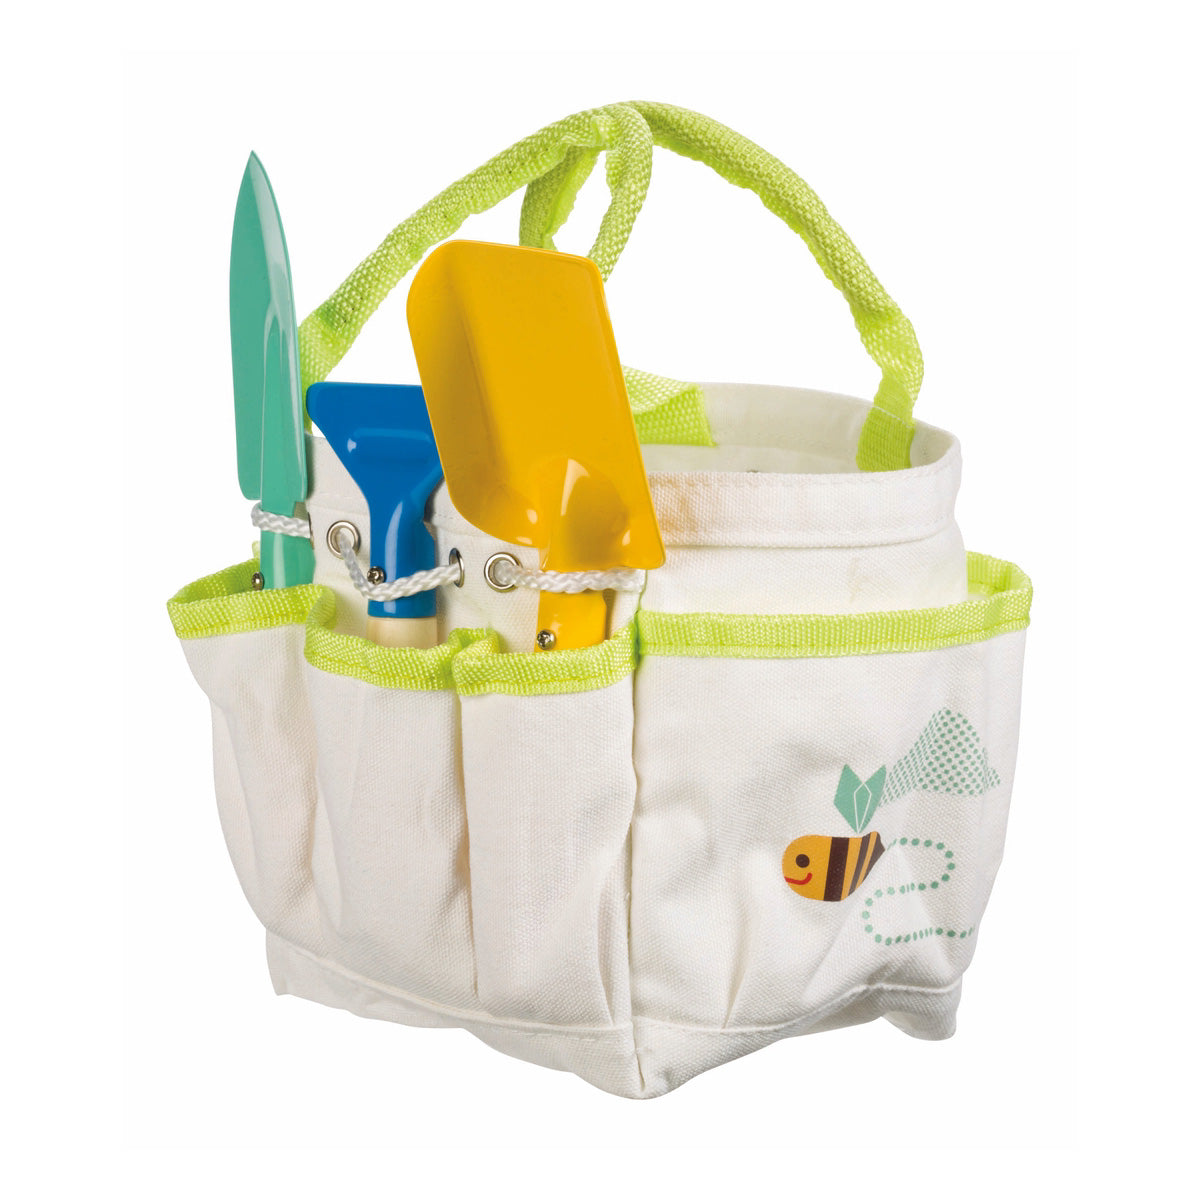 Beetle & Bee Kids Garden Tote with Hand Tools - 4pc Set